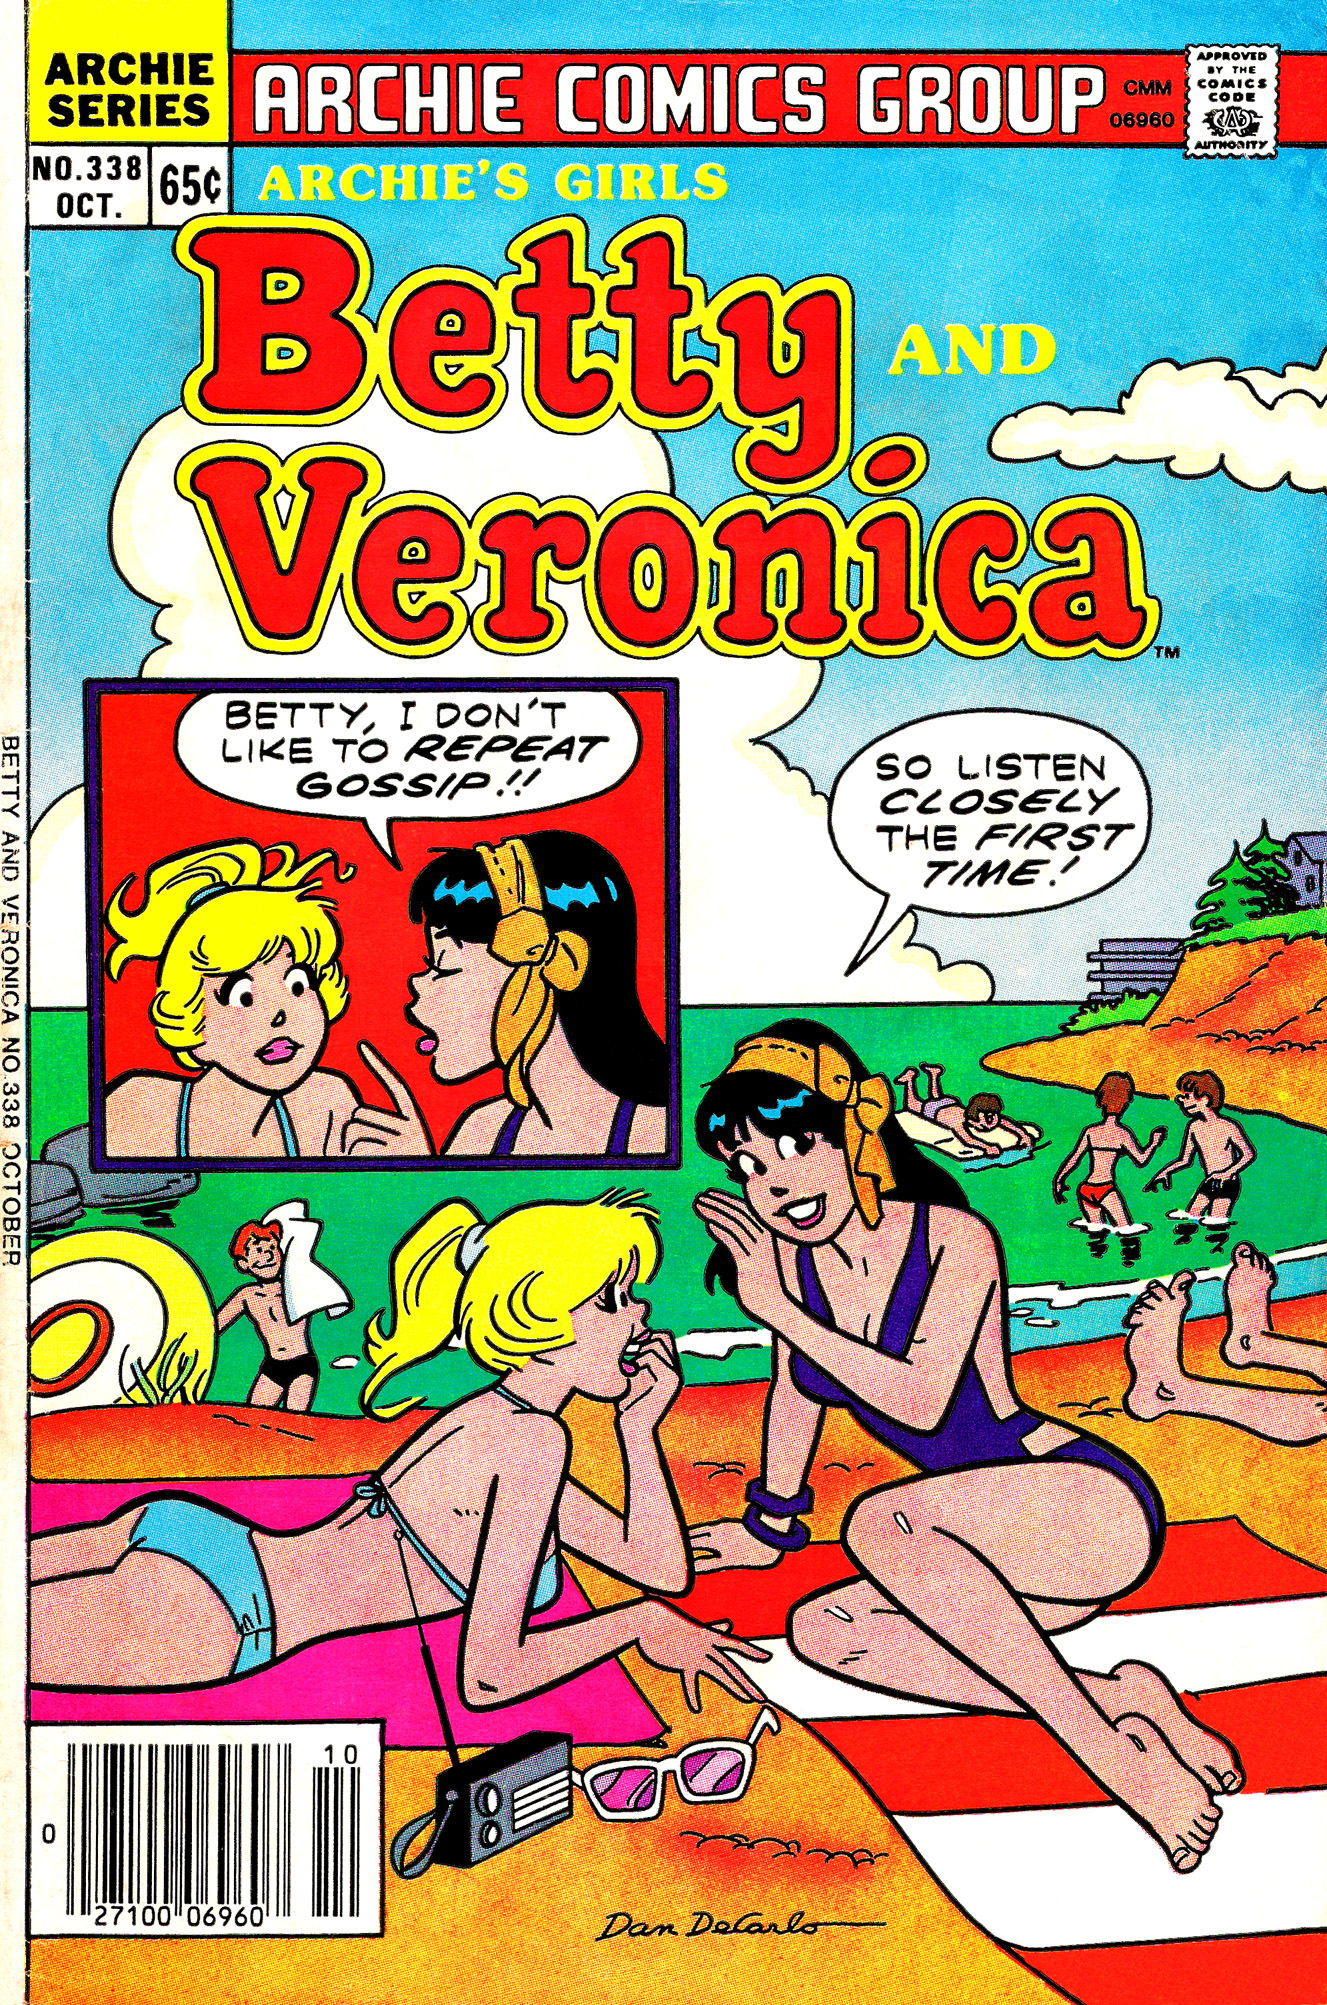 Read online Archie's Girls Betty and Veronica comic -  Issue #338 - 1